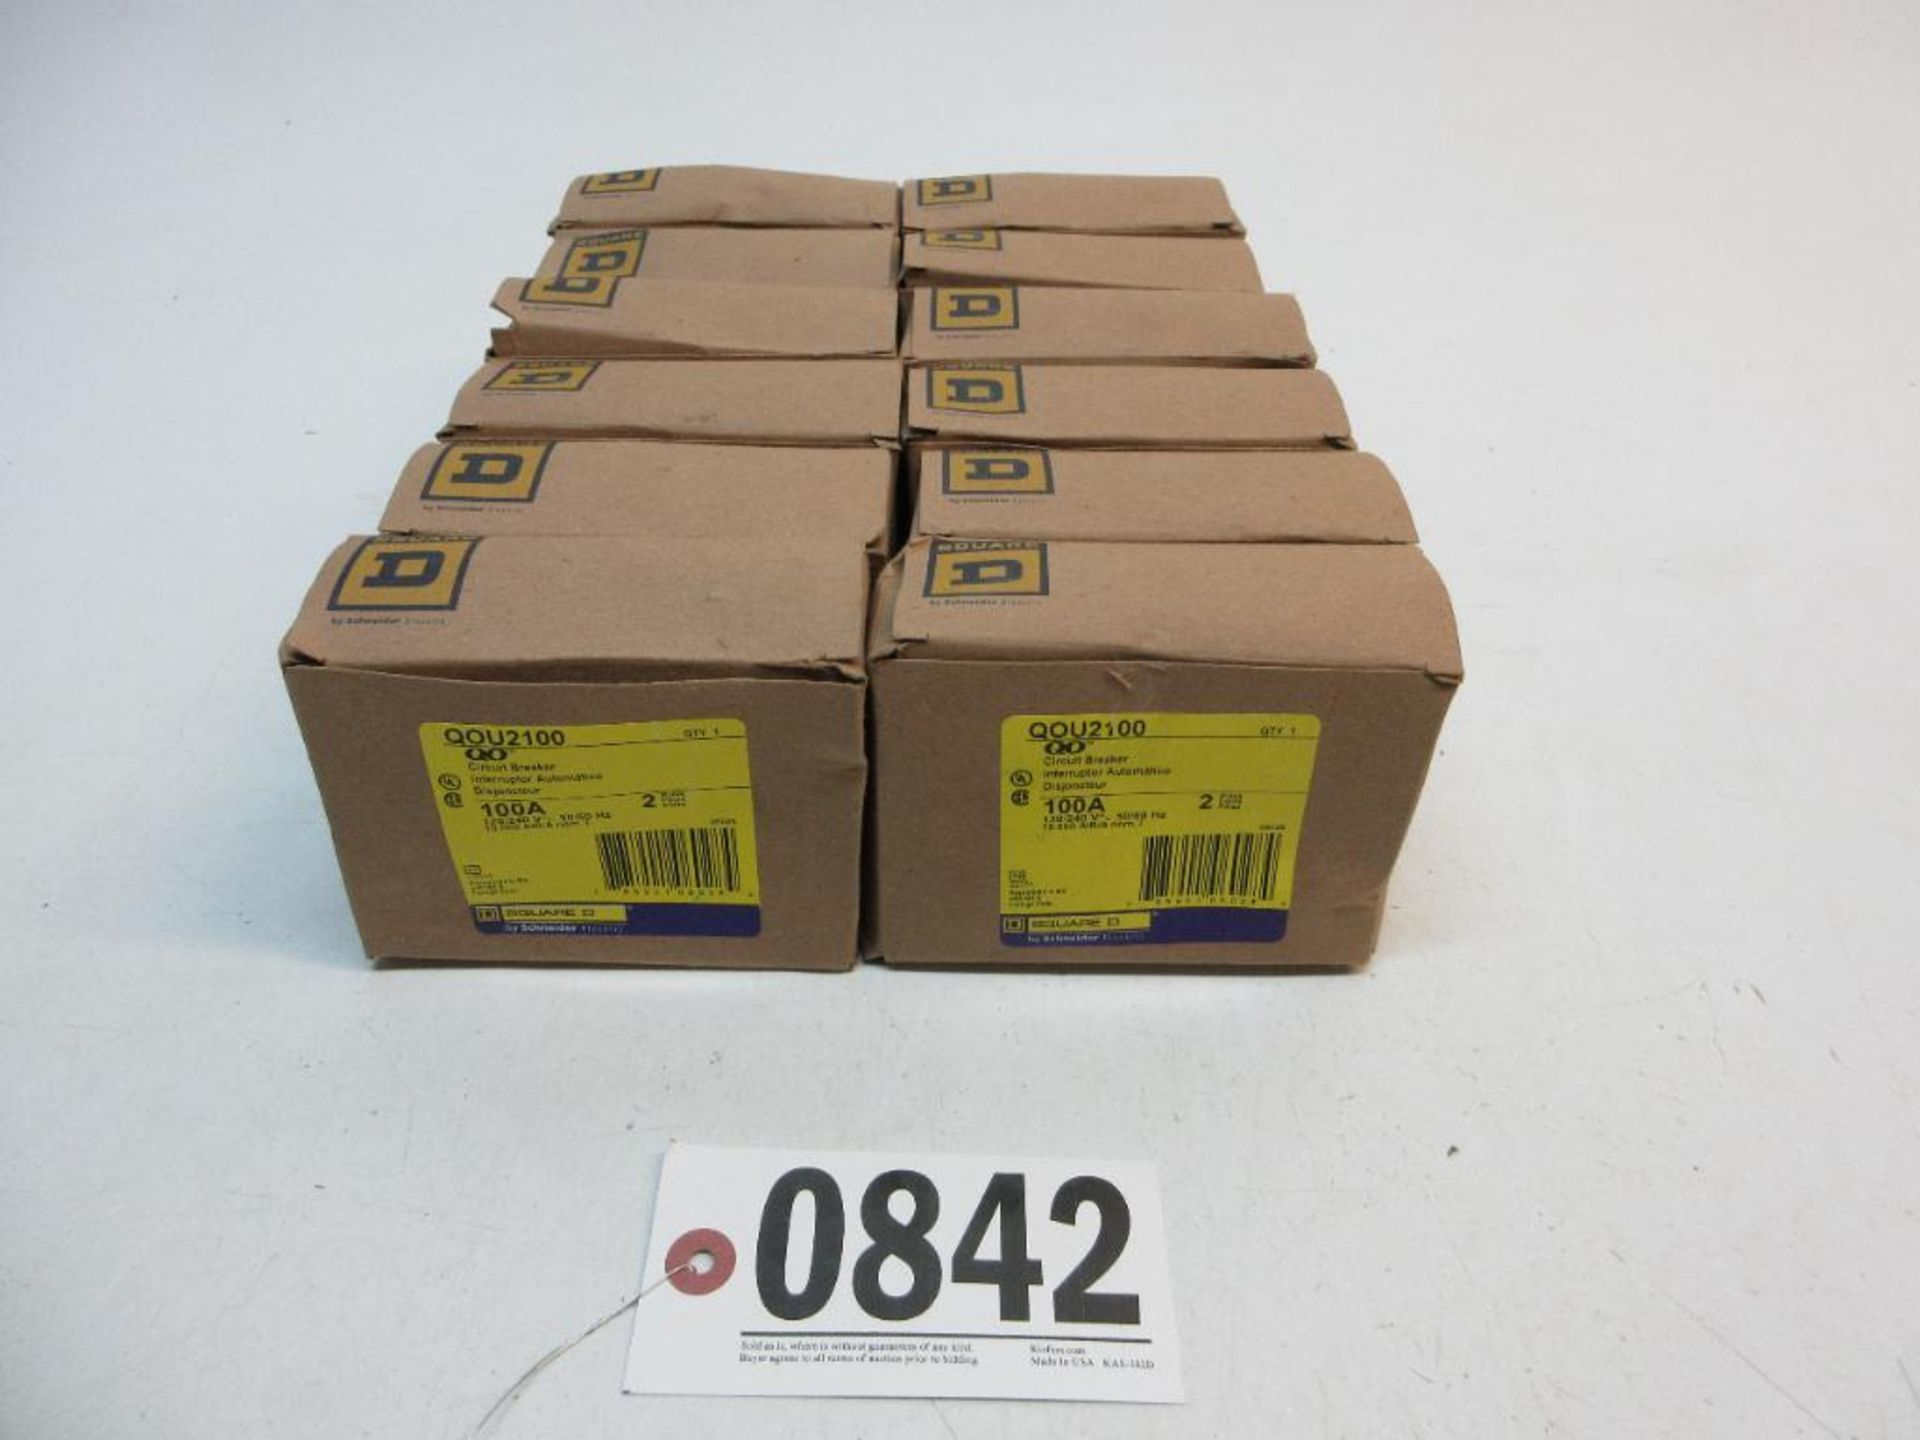 (12) SQUARE D QOU2100 CIRCUIT BREAKERS 100A 2 POLE NEW (THIS LOT IS FOB CAMARILLO CA) - (There will